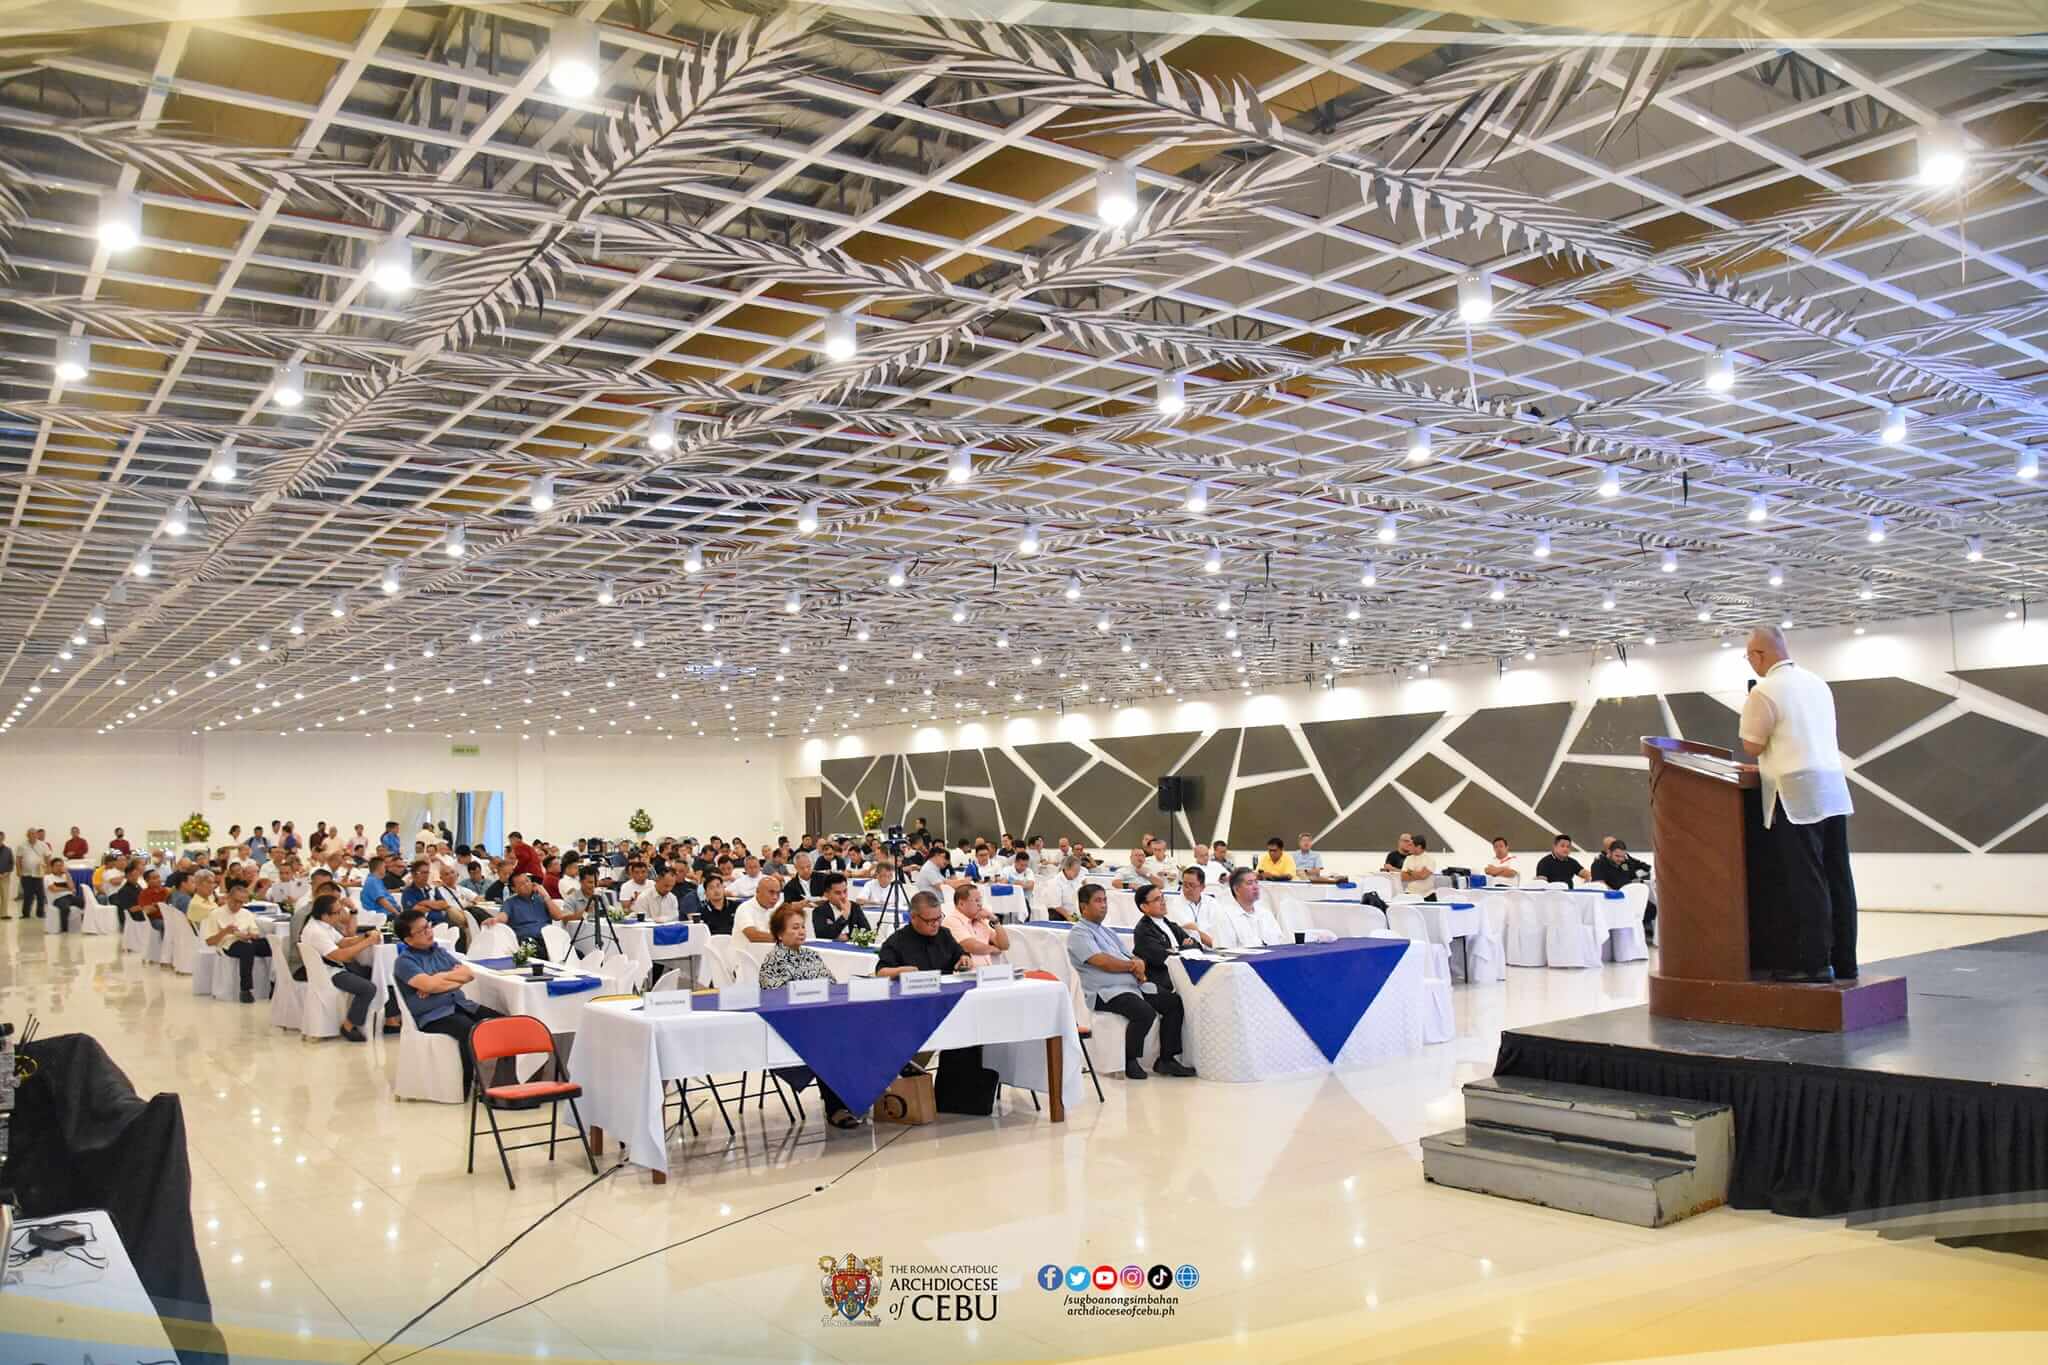 SUGBUSWAK. Cebu Archbishop Jose S. Palma gave the welcome address during the Day of Prayer and Discernment last September 18, 2023, which was held to discuss the move to break up the Archdiocese of Cebu.